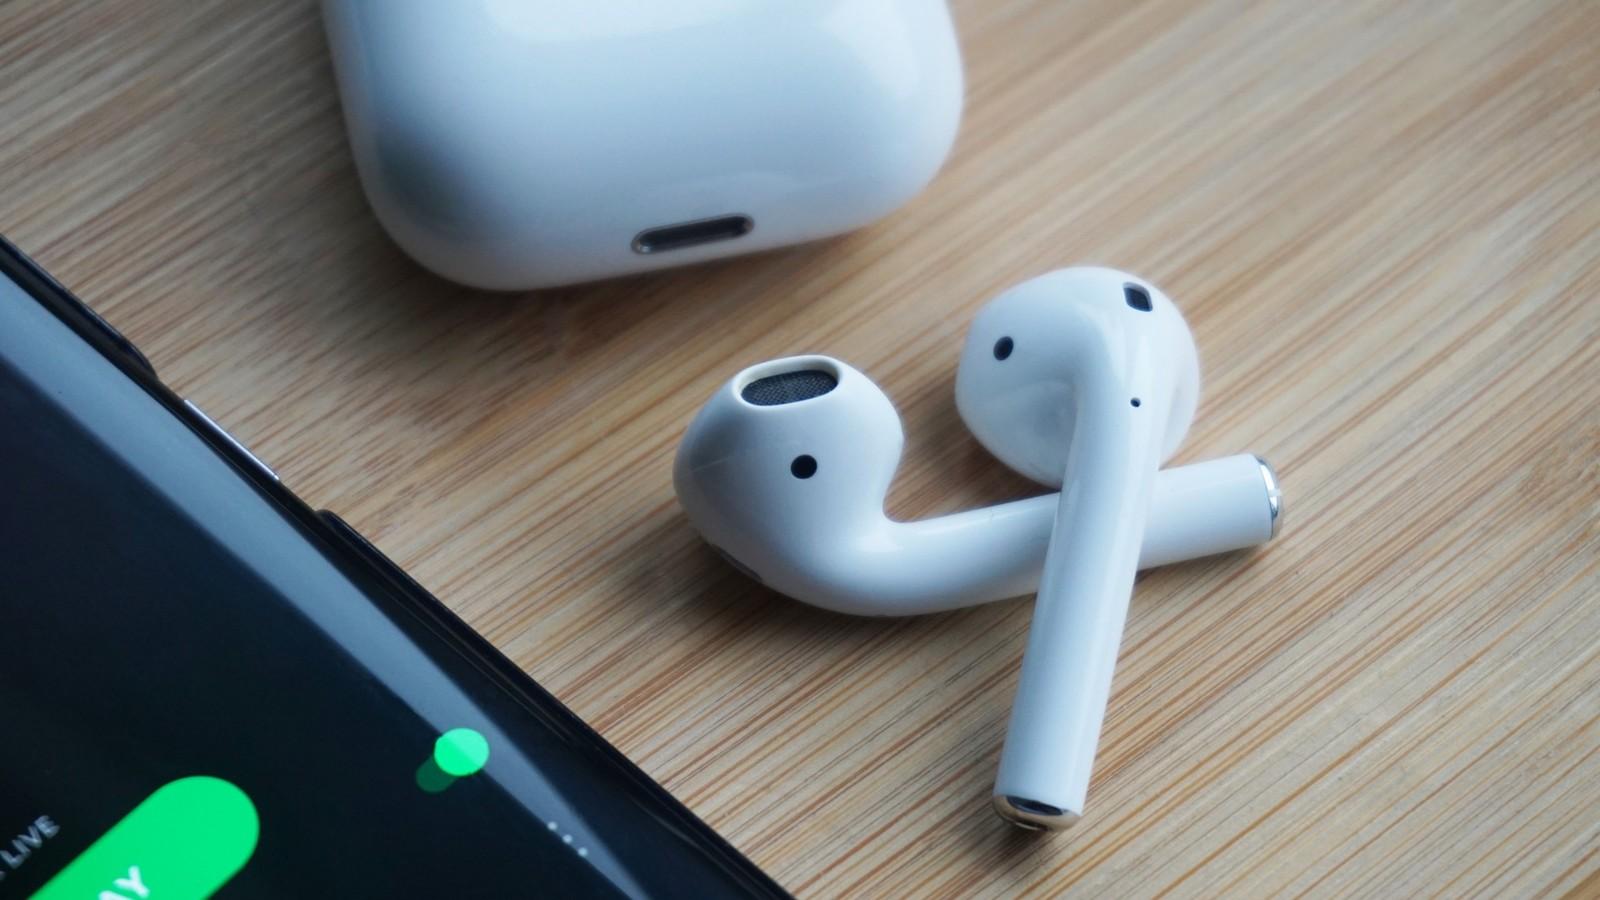 How to order AirPods 2 in Canada